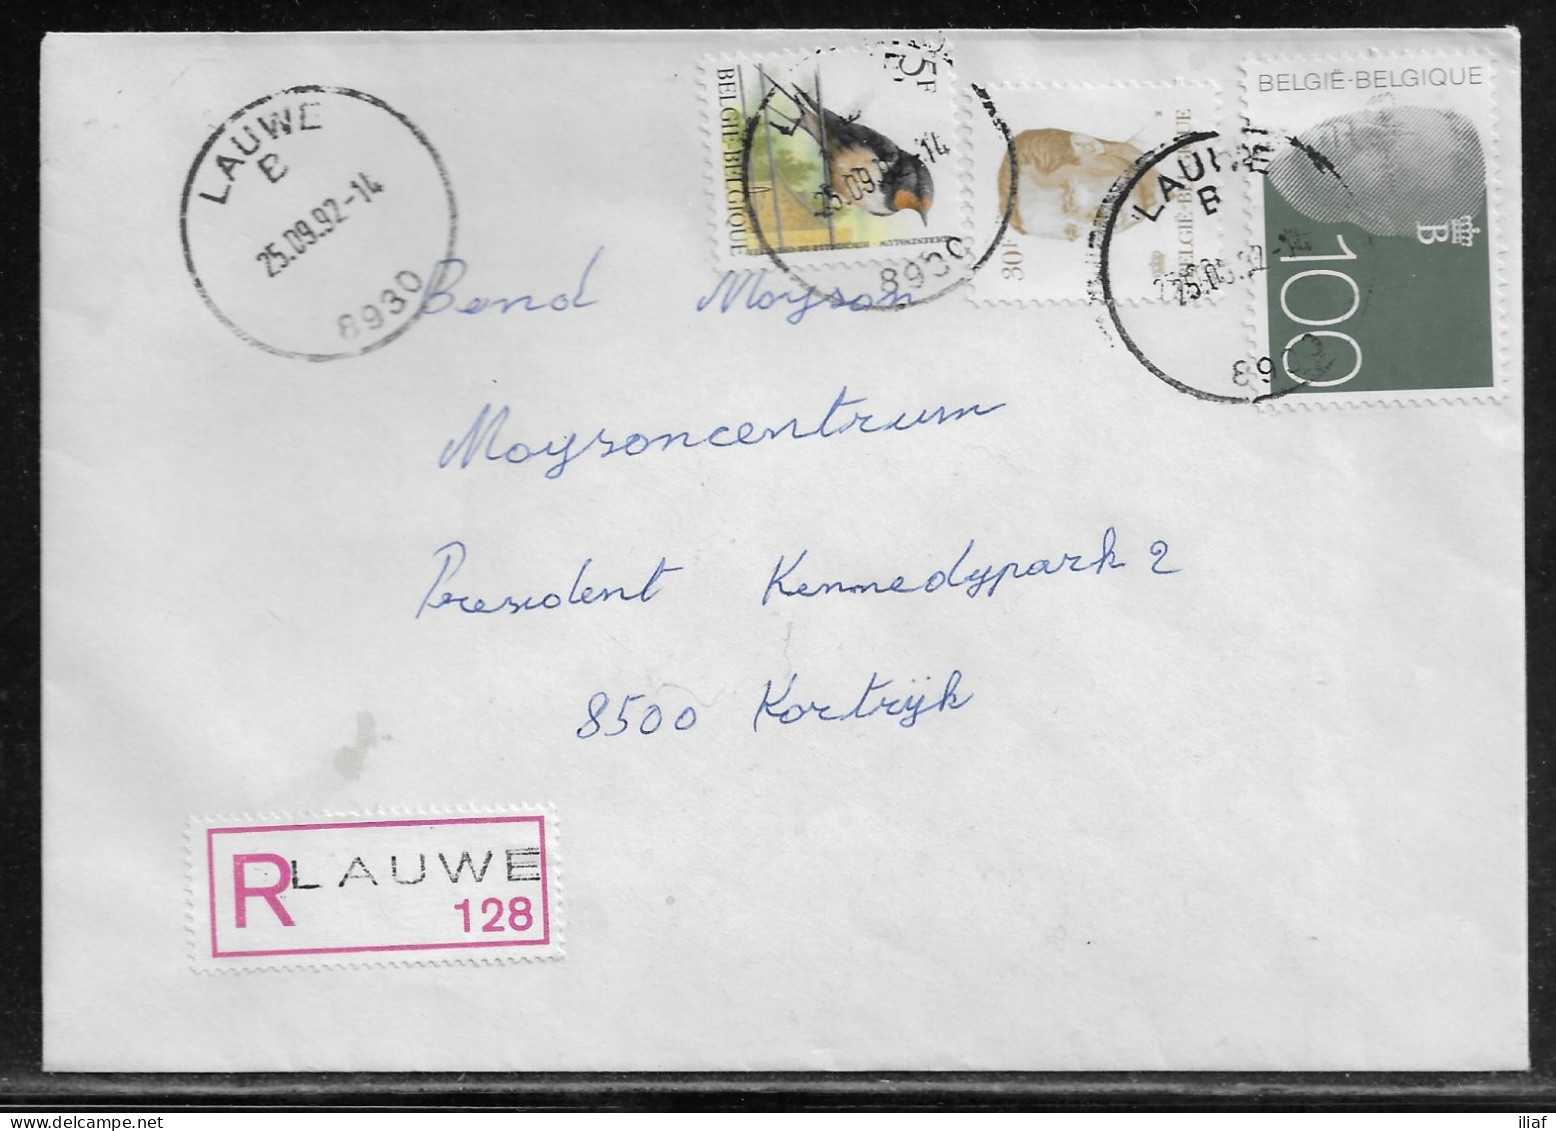 Belgium. Stamps Mi. 2527, Mi. 2533, Mi. 2212 On Registered Letter Sent From Lauwe On 25.09.1992 For Kortrijk. - Covers & Documents